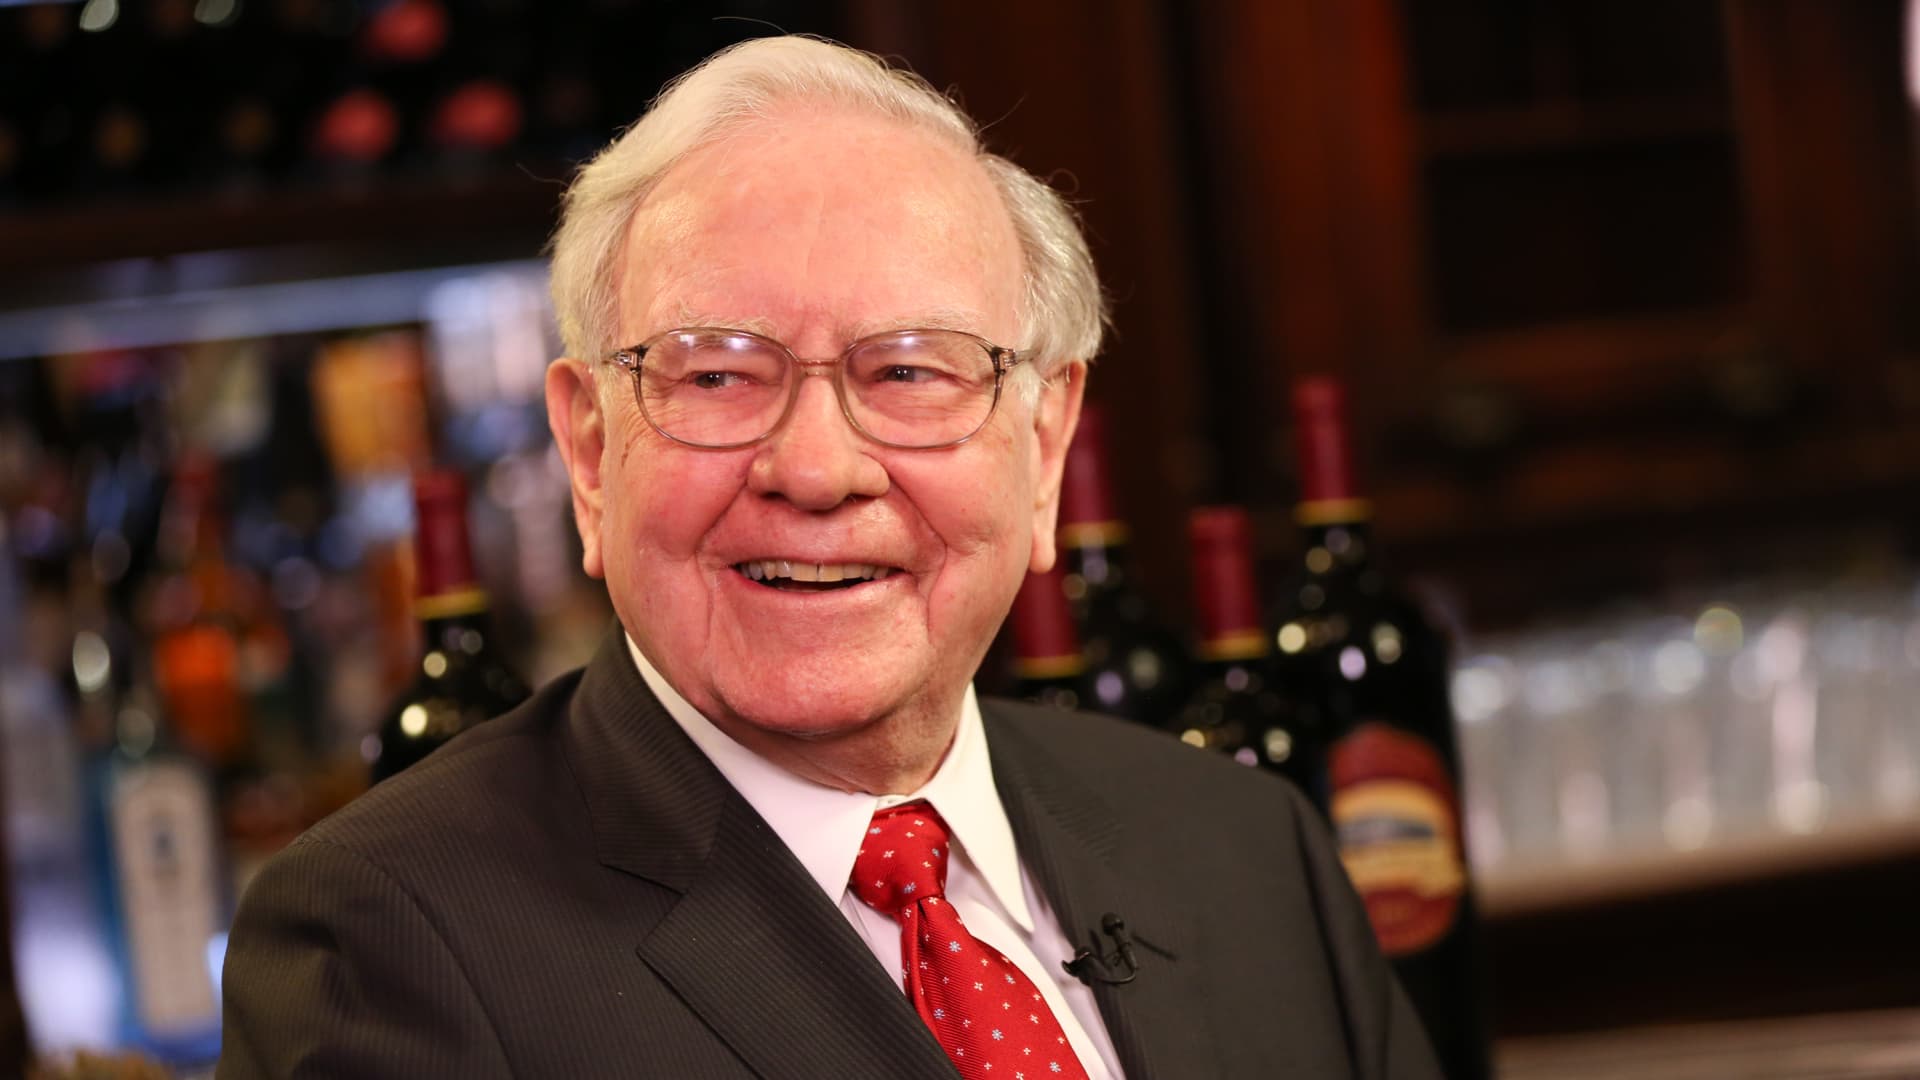 Warren Buffett’s Berkshire Hathaway has been a fortress stock during recessions and bear markets. Here’s how